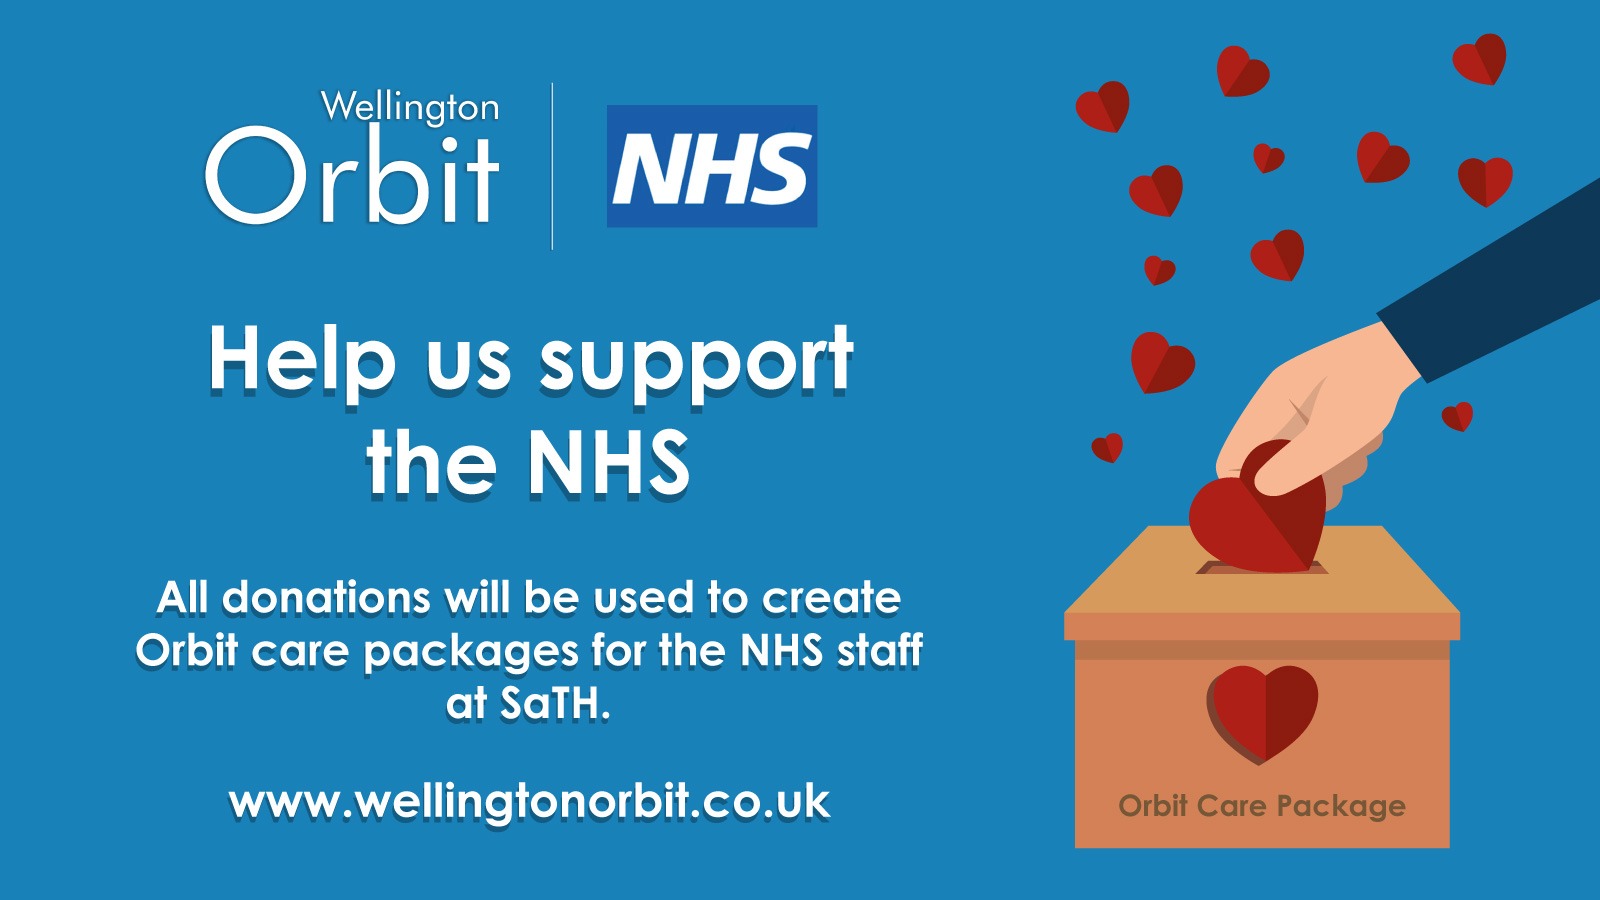 Orbit continues support for NHS staff at SaTH - Wellington Orbit